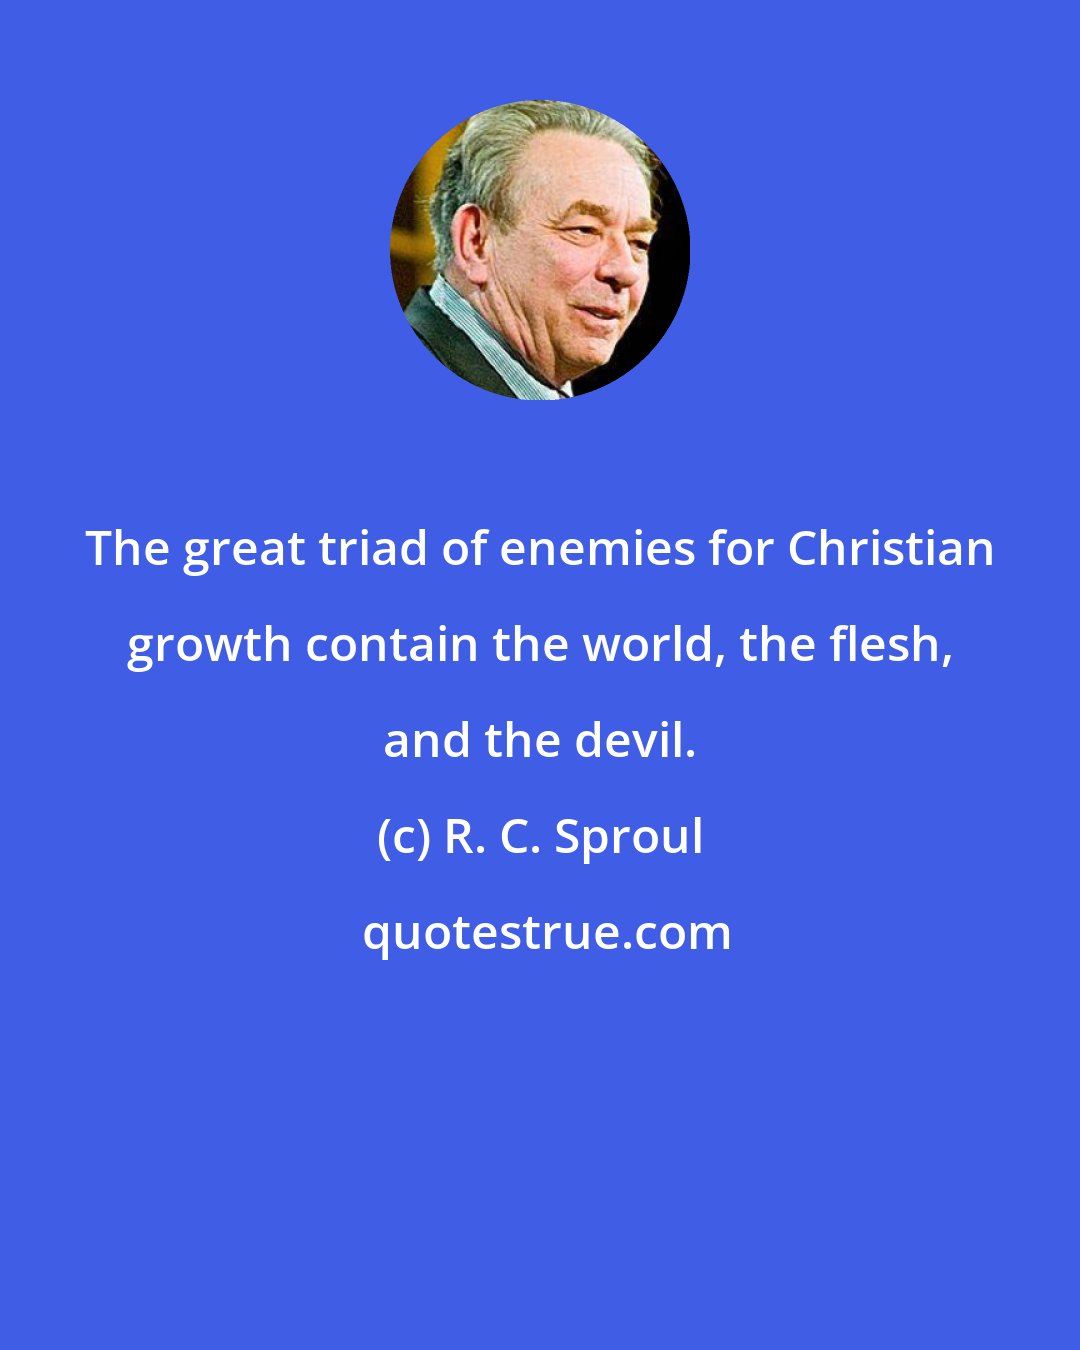 R. C. Sproul: The great triad of enemies for Christian growth contain the world, the flesh, and the devil.